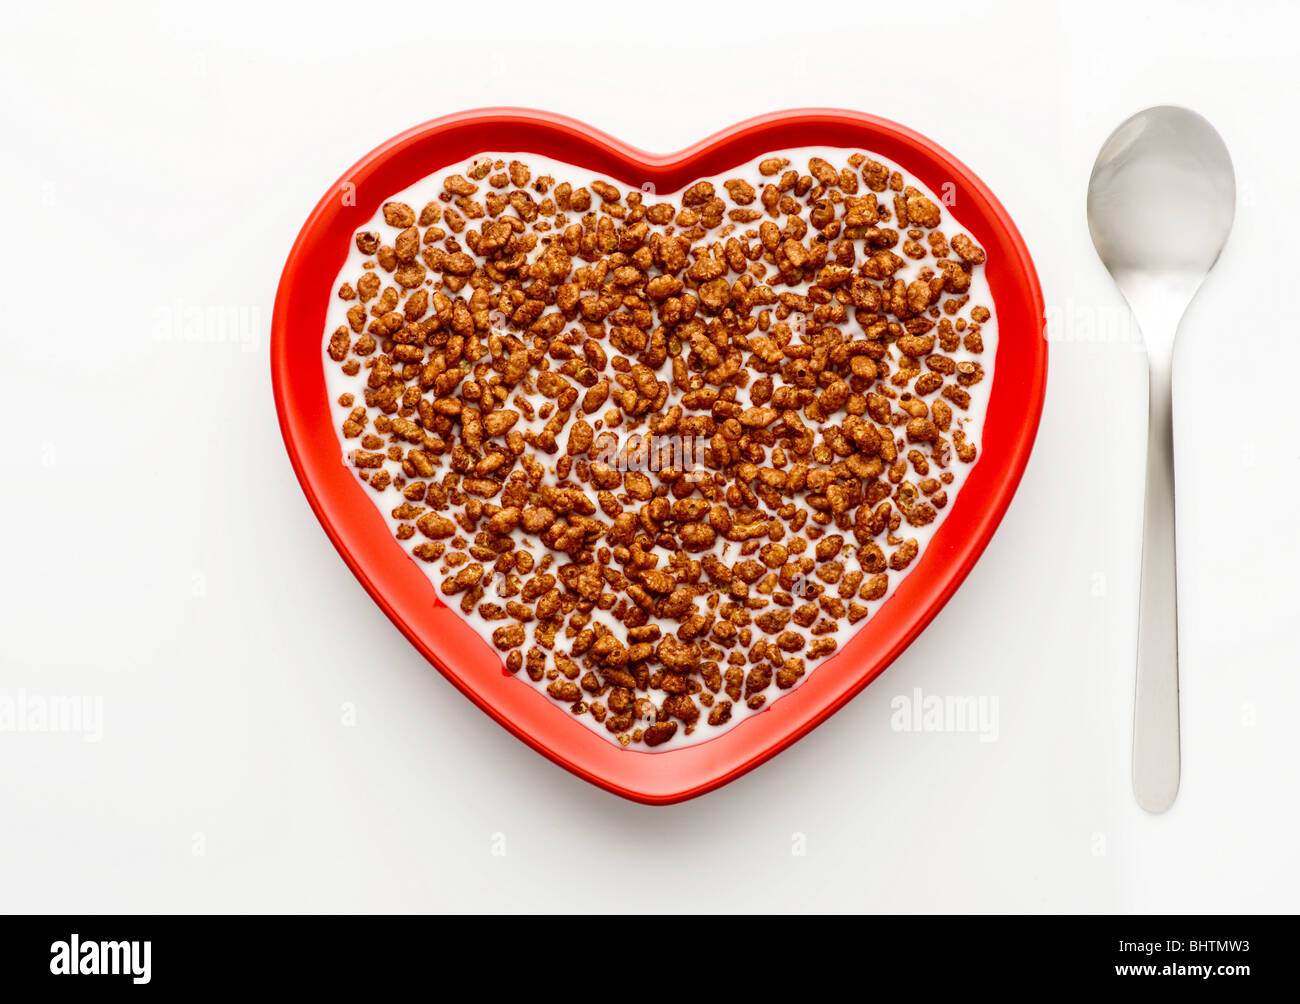 Studio shot of red heart shaped bowl of coco pops and milk with a spoon,on a white background, shot from above. Stock Photo